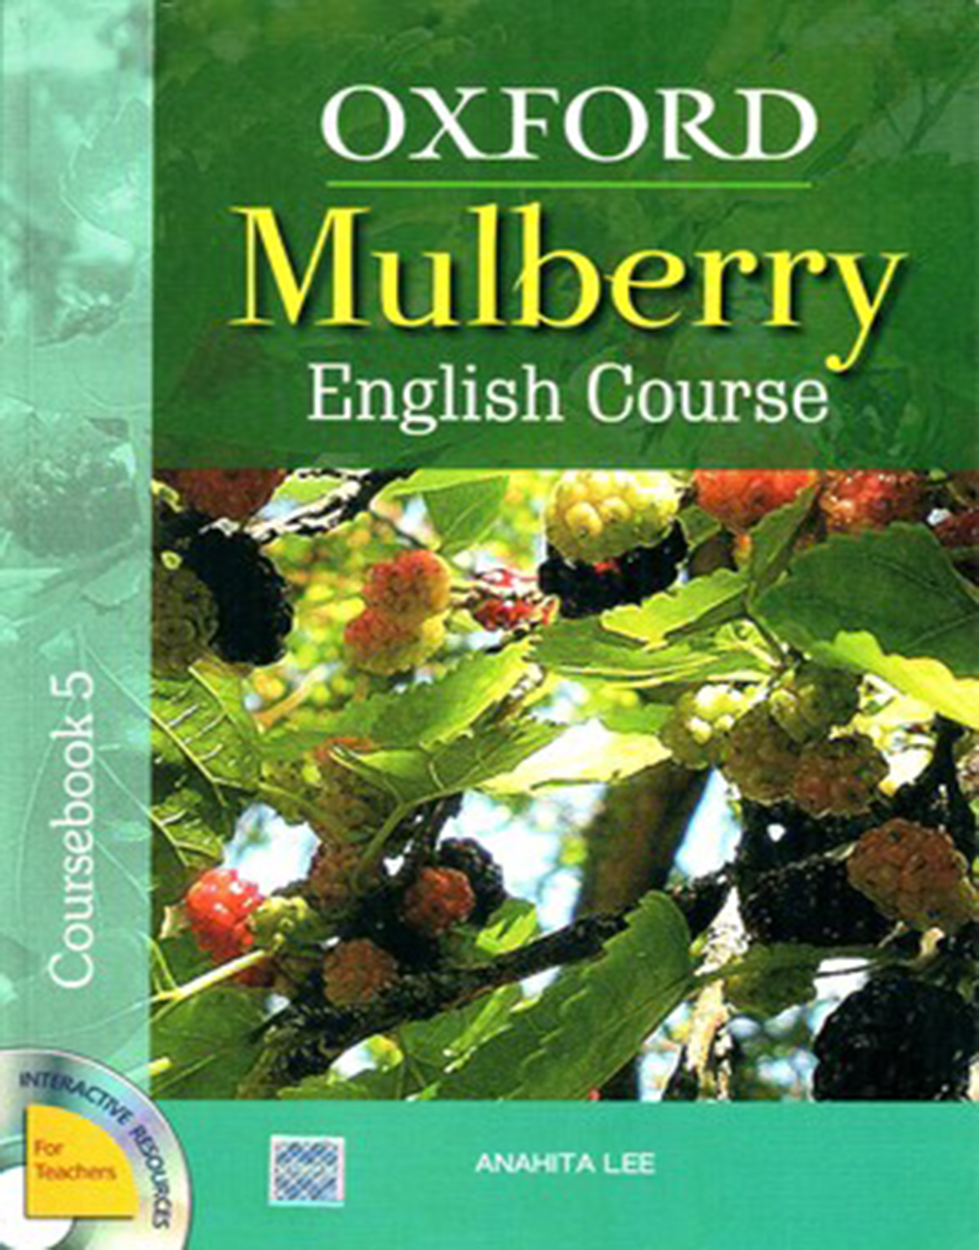 Oxford Mulberry English Coursebook 5